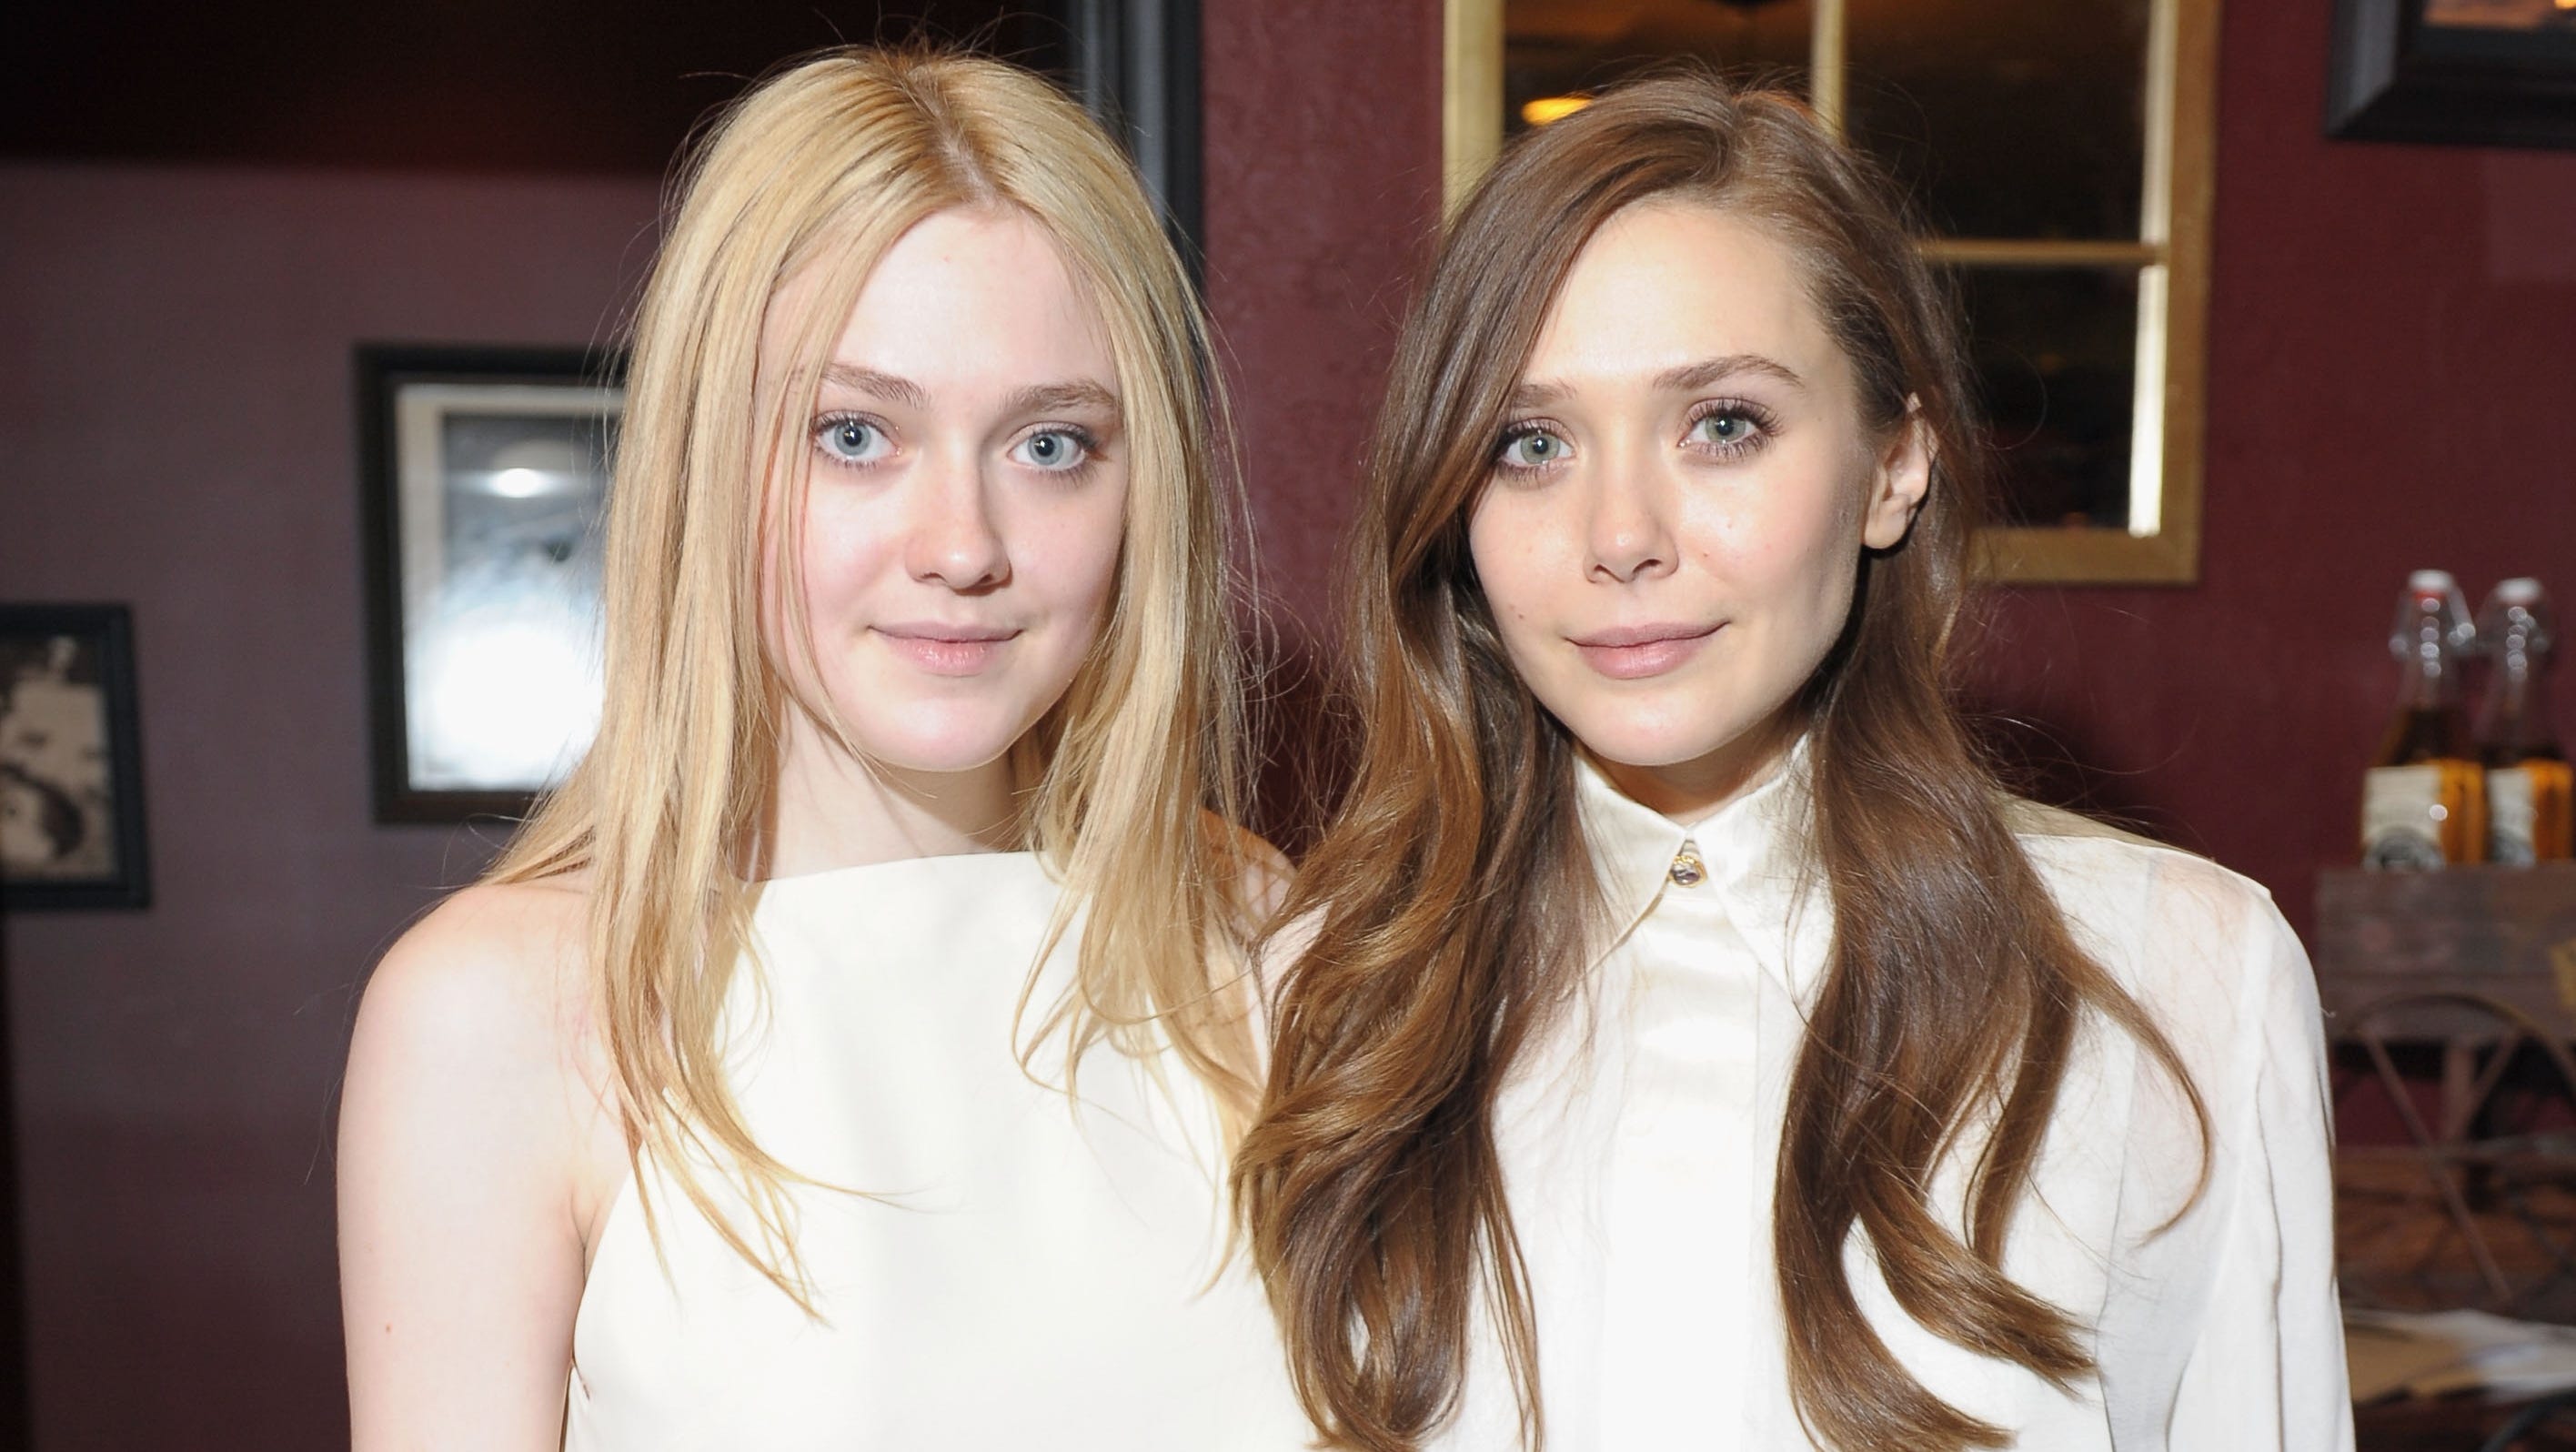 Good' pals Olsen bare (almost) all at